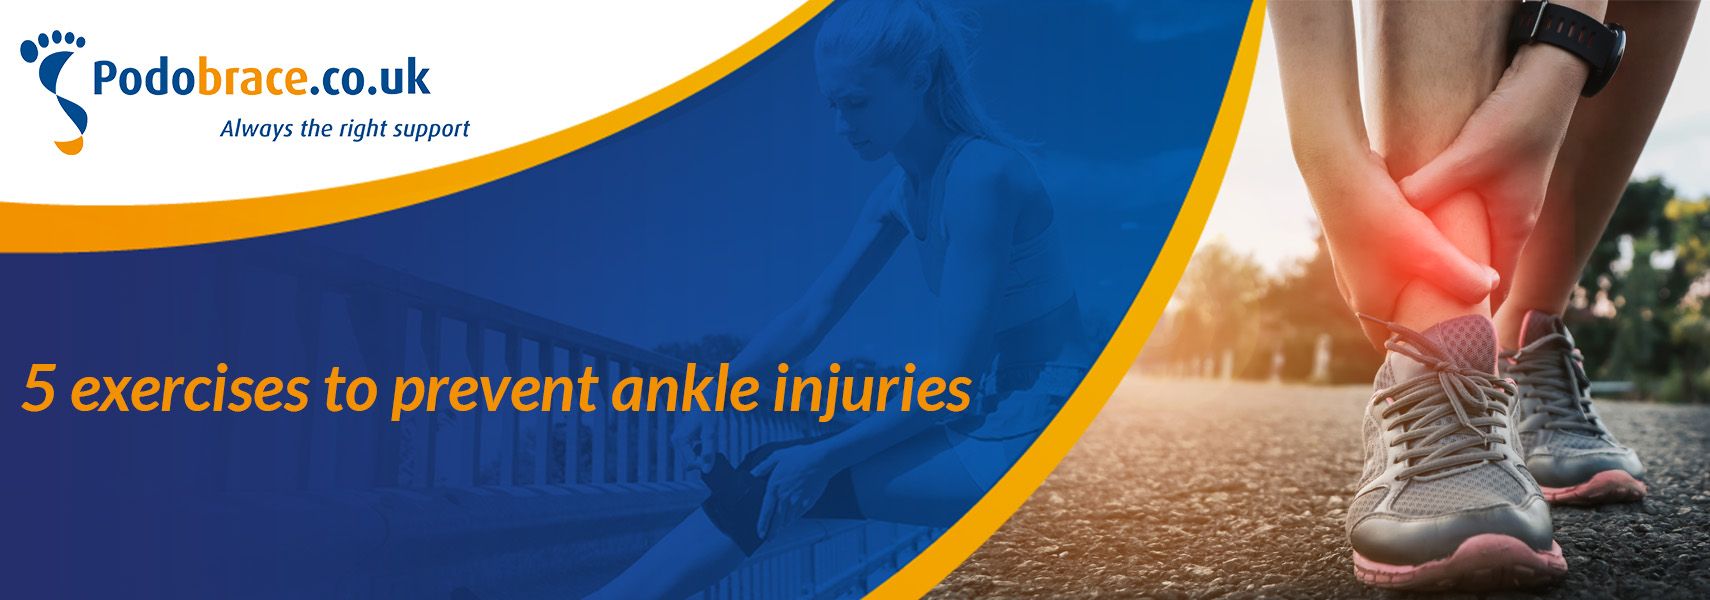 5 exercises to prevent ankle injuries